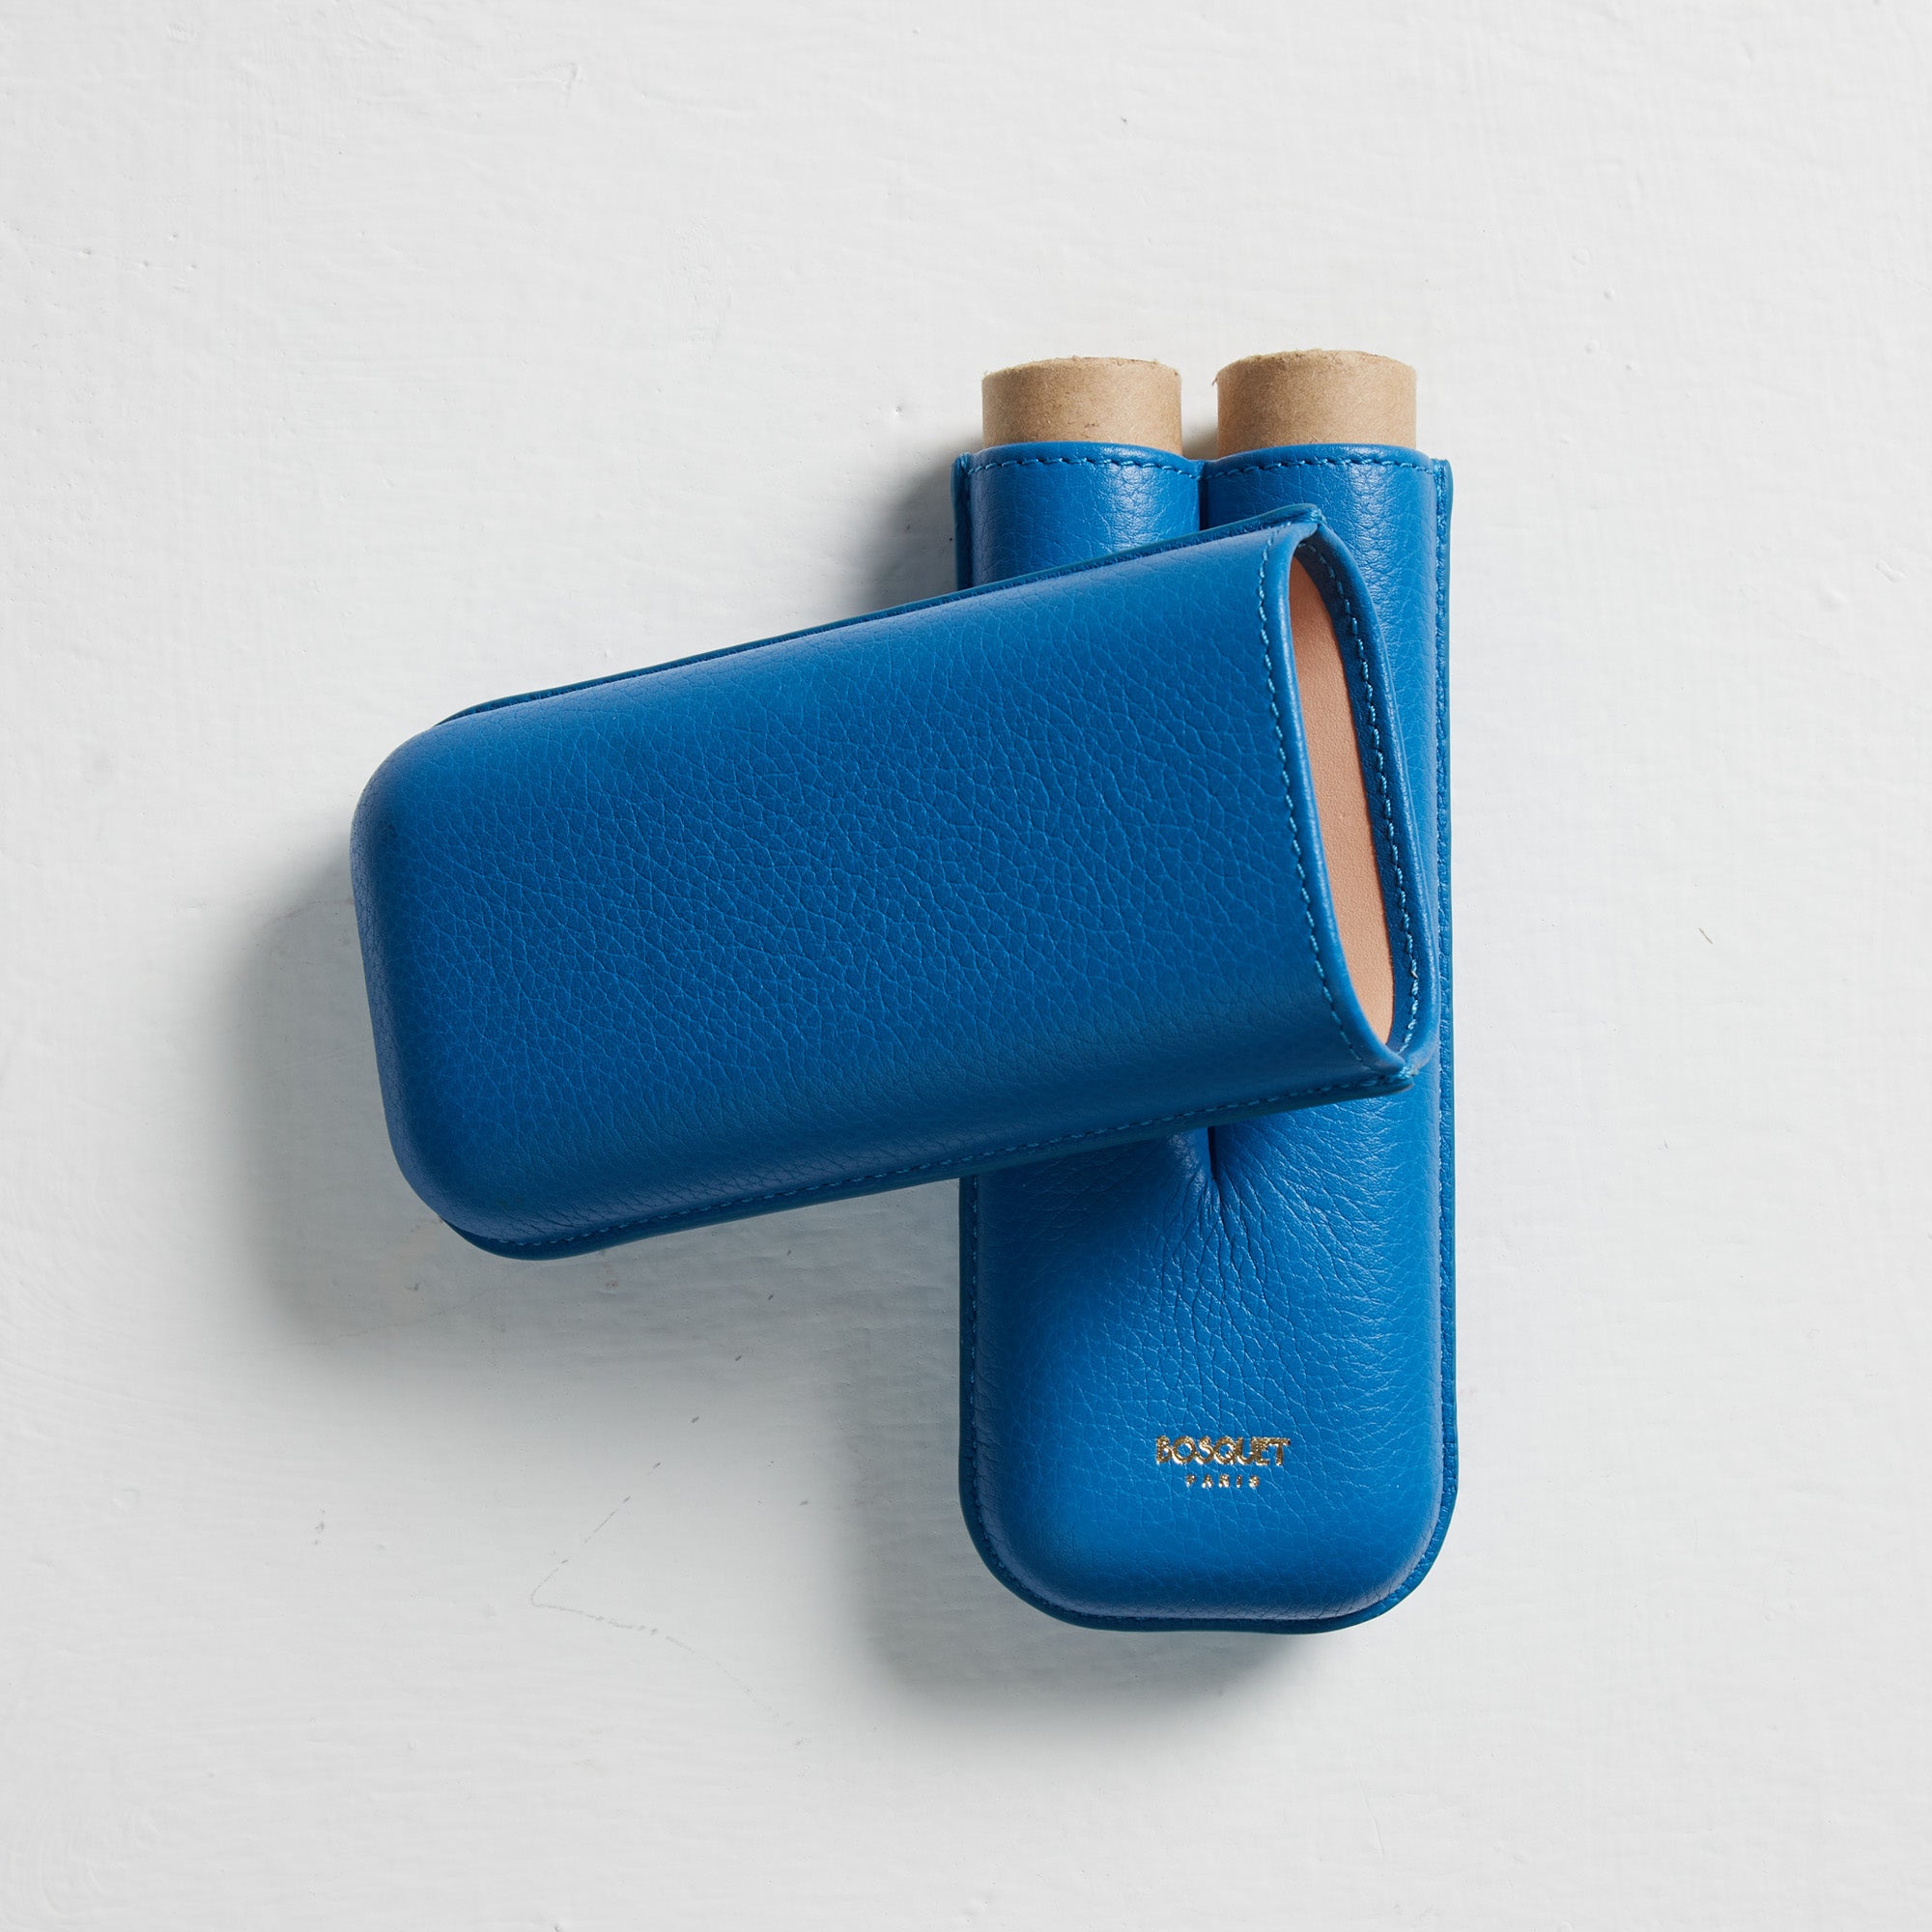 A Bosque Smooth Capri Blue Leather Cigar Case with a blue cover made from French leathers.